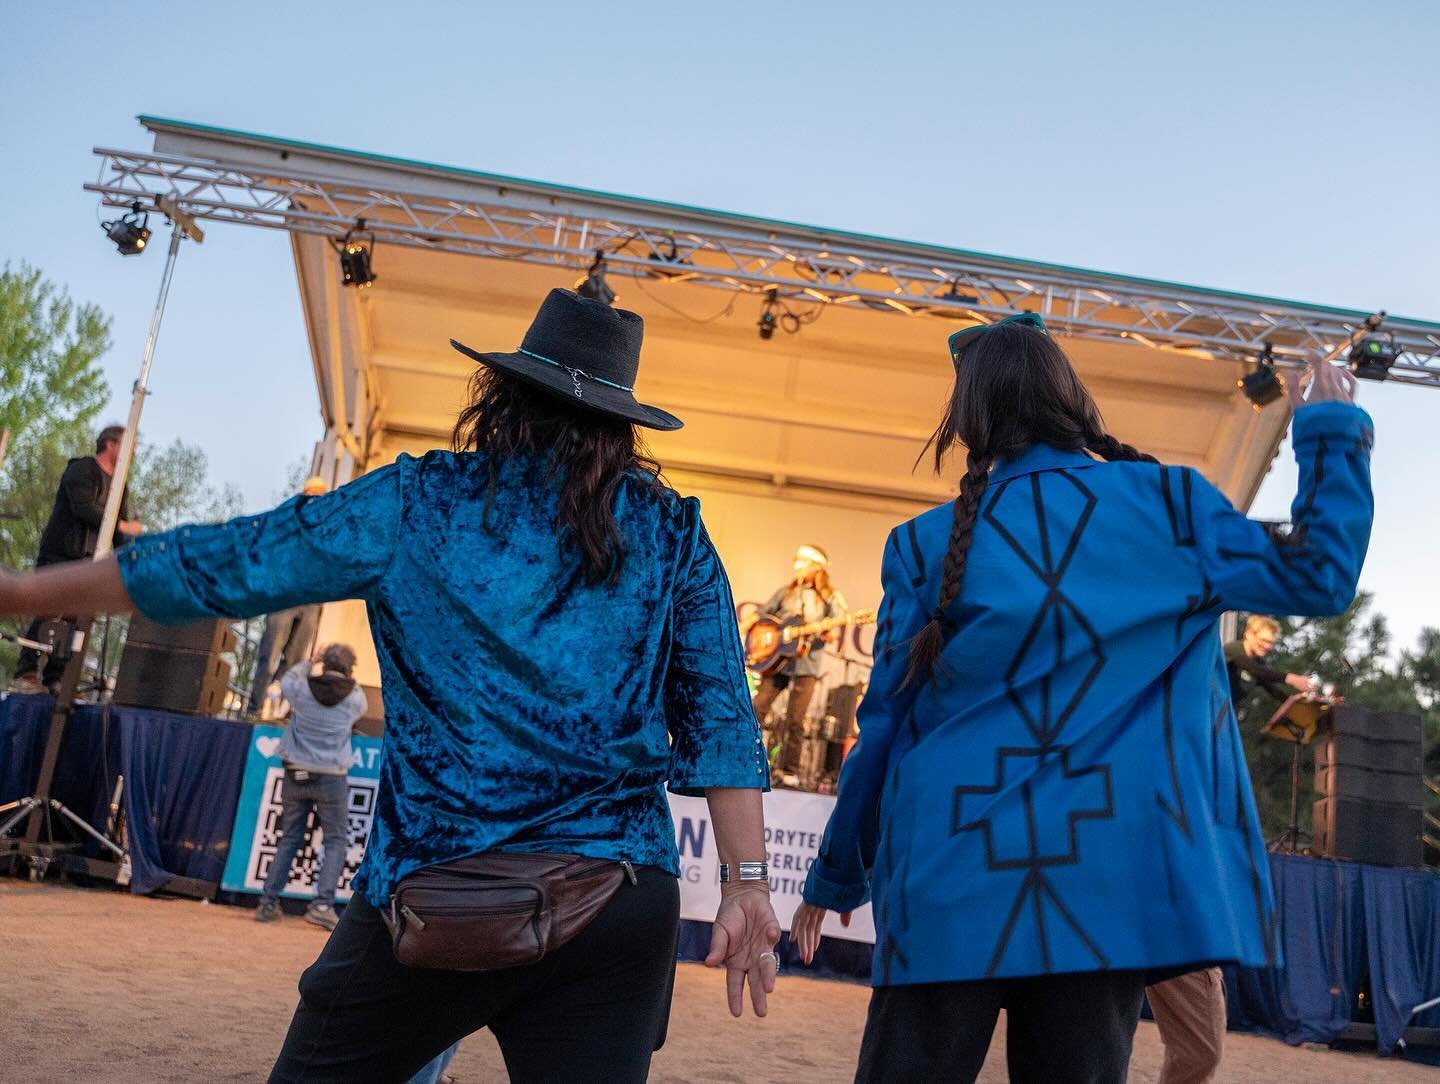 THANK YOU from the bottom of our hearts to everyone who brought their love and energy to the May 3rd IndigenousWays Festival! We moved together and sang together to celebrate our beautiful Indigenous cultures, and your presence made this a truly spec